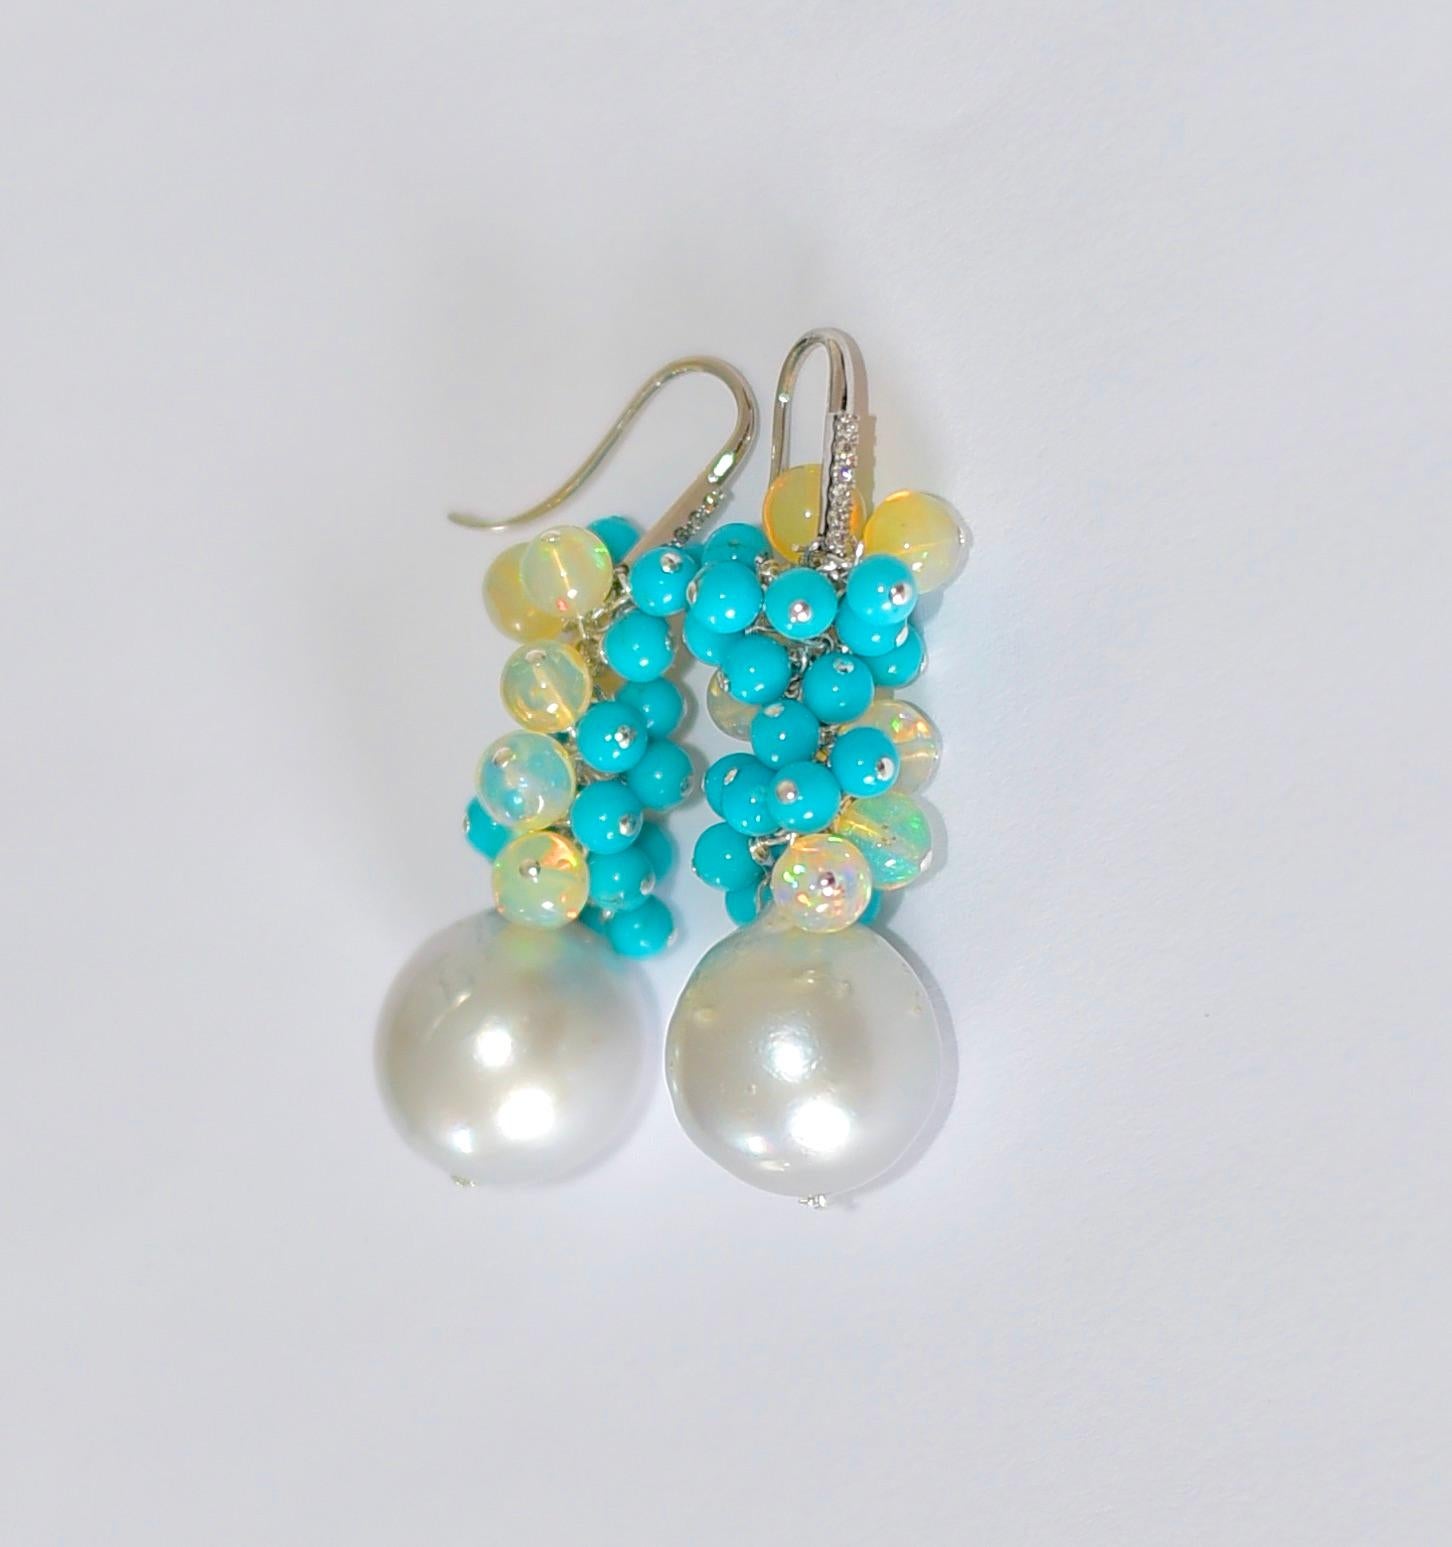 Artisan Sleeping Beauty Turquoise, Crystal Opal Earrings in 14K Solid White Gold For Sale